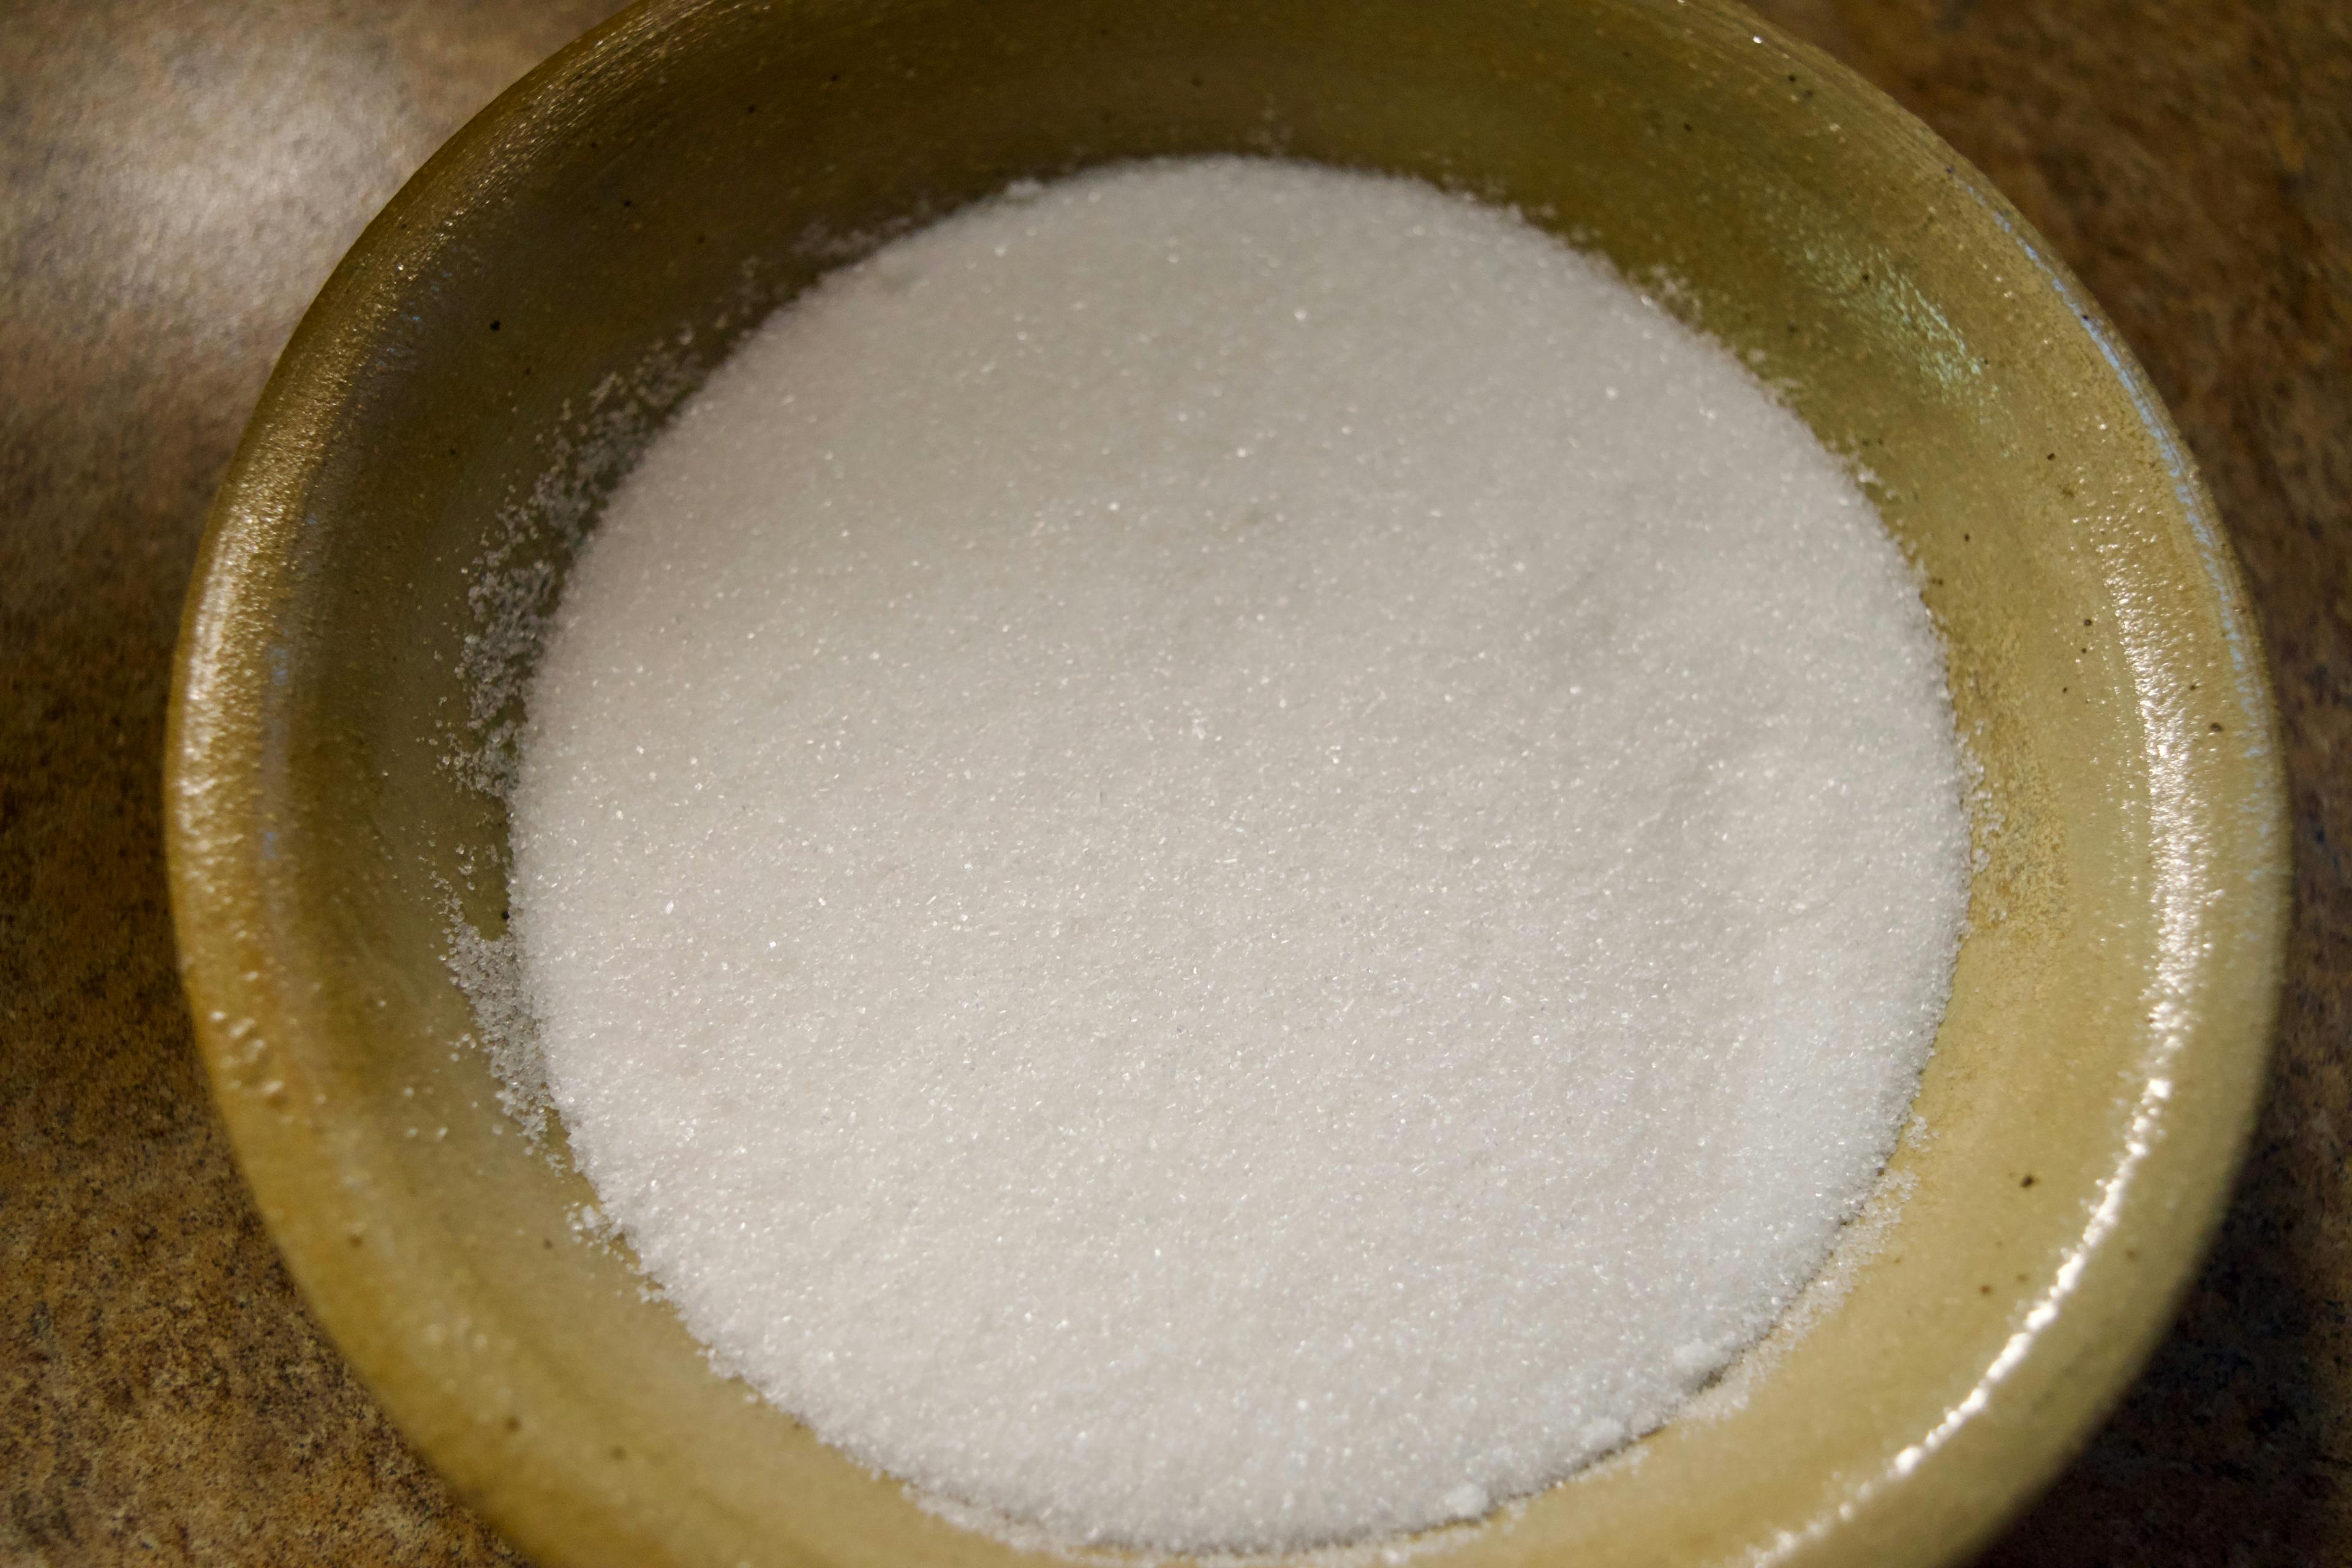 A small bowl of finely ground sugar